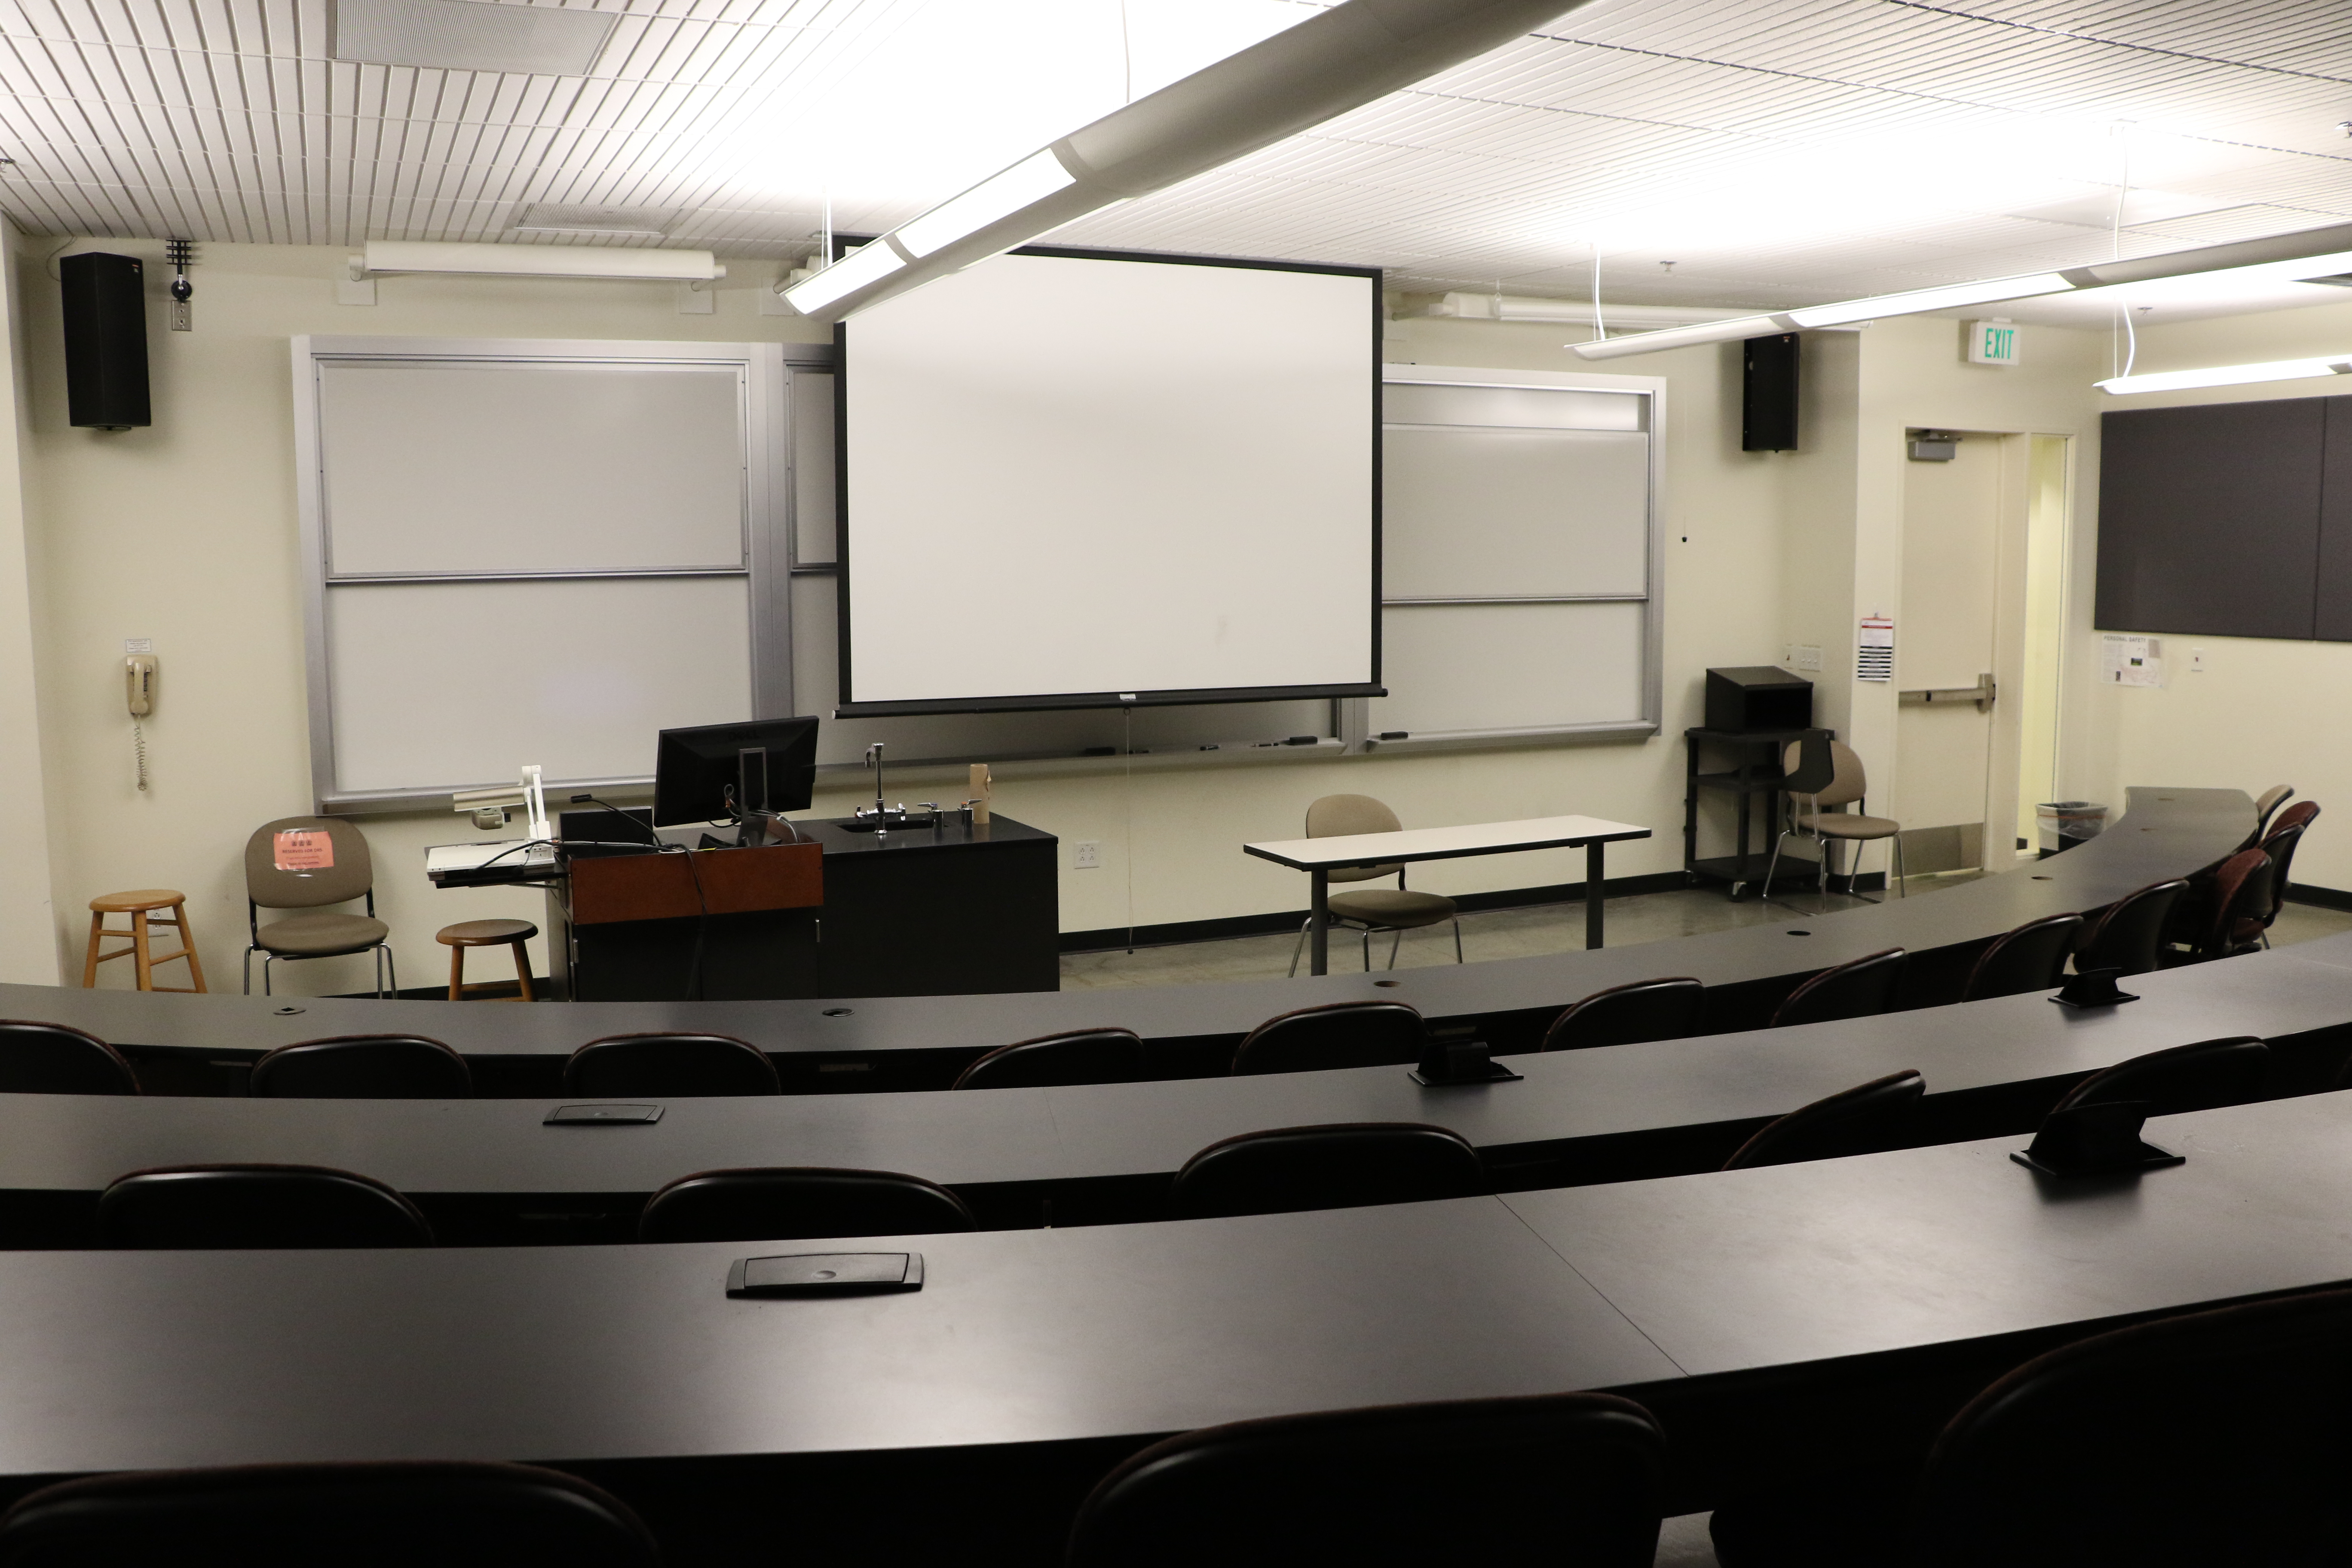 Room Consists of hard floors, Stationary rows of tables and chairs, a white board and podium are both located at the front of the room.